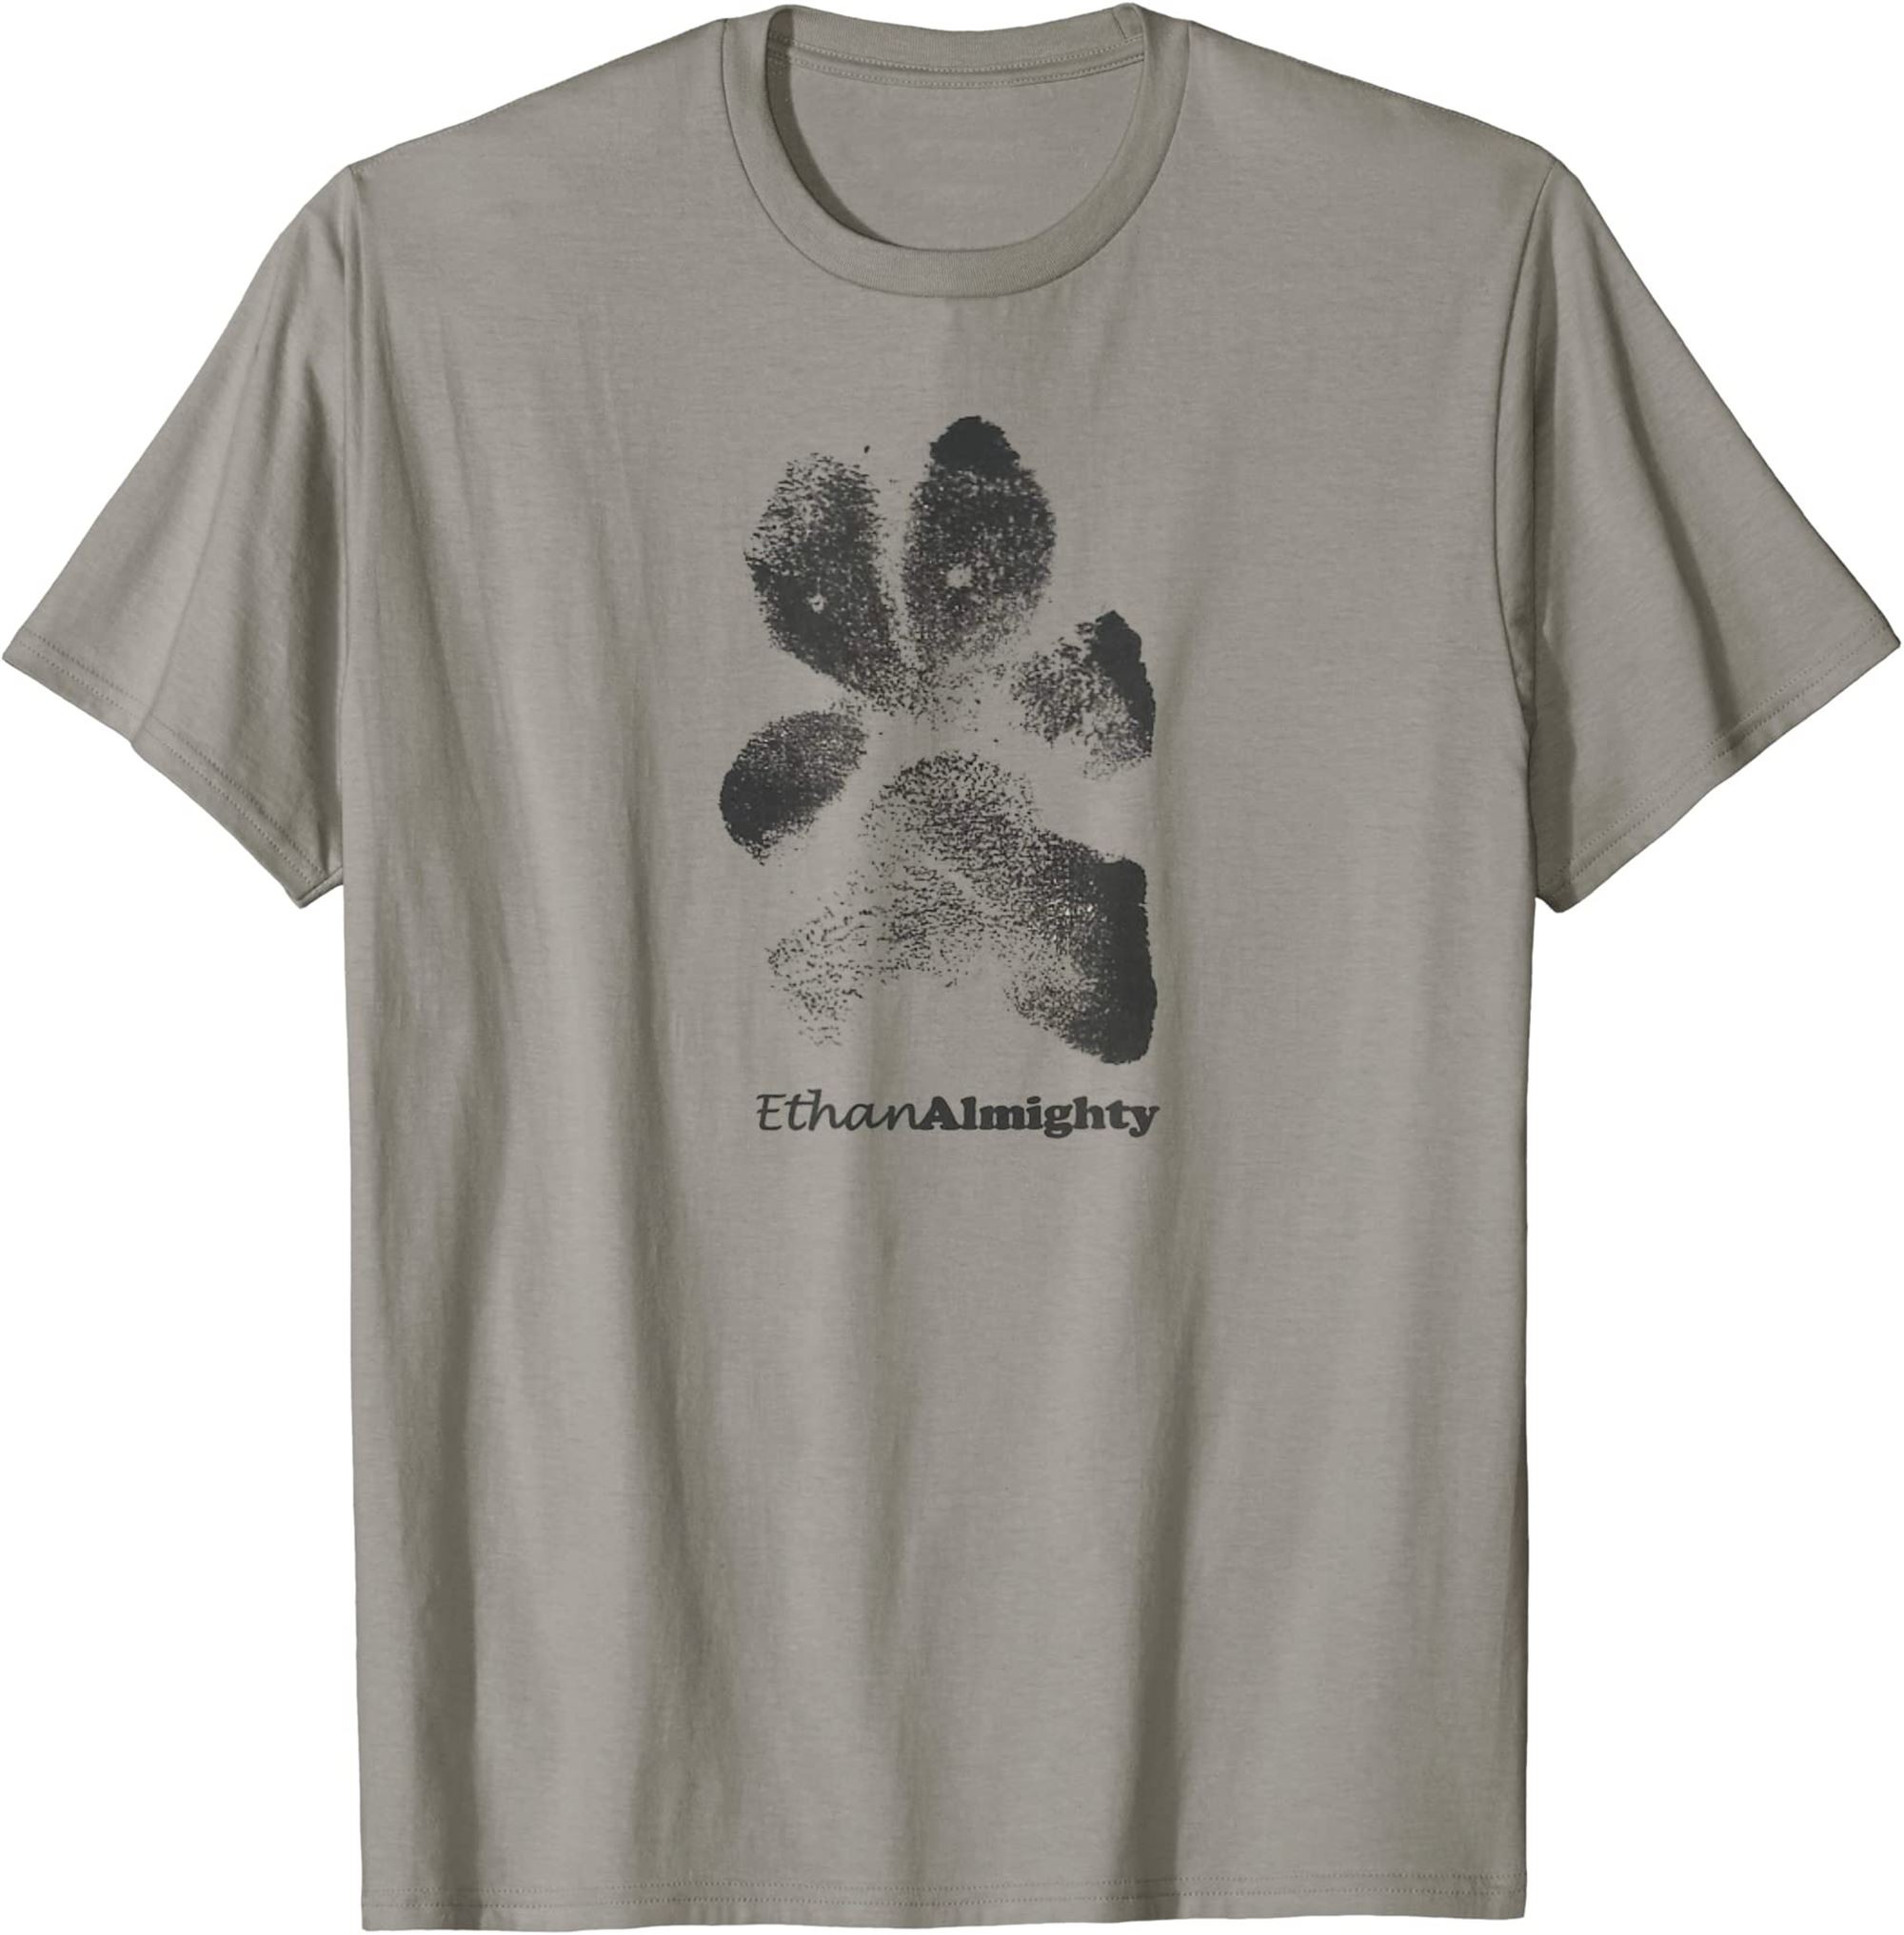 Ethan Paw T-shirt Size Up To 5xl